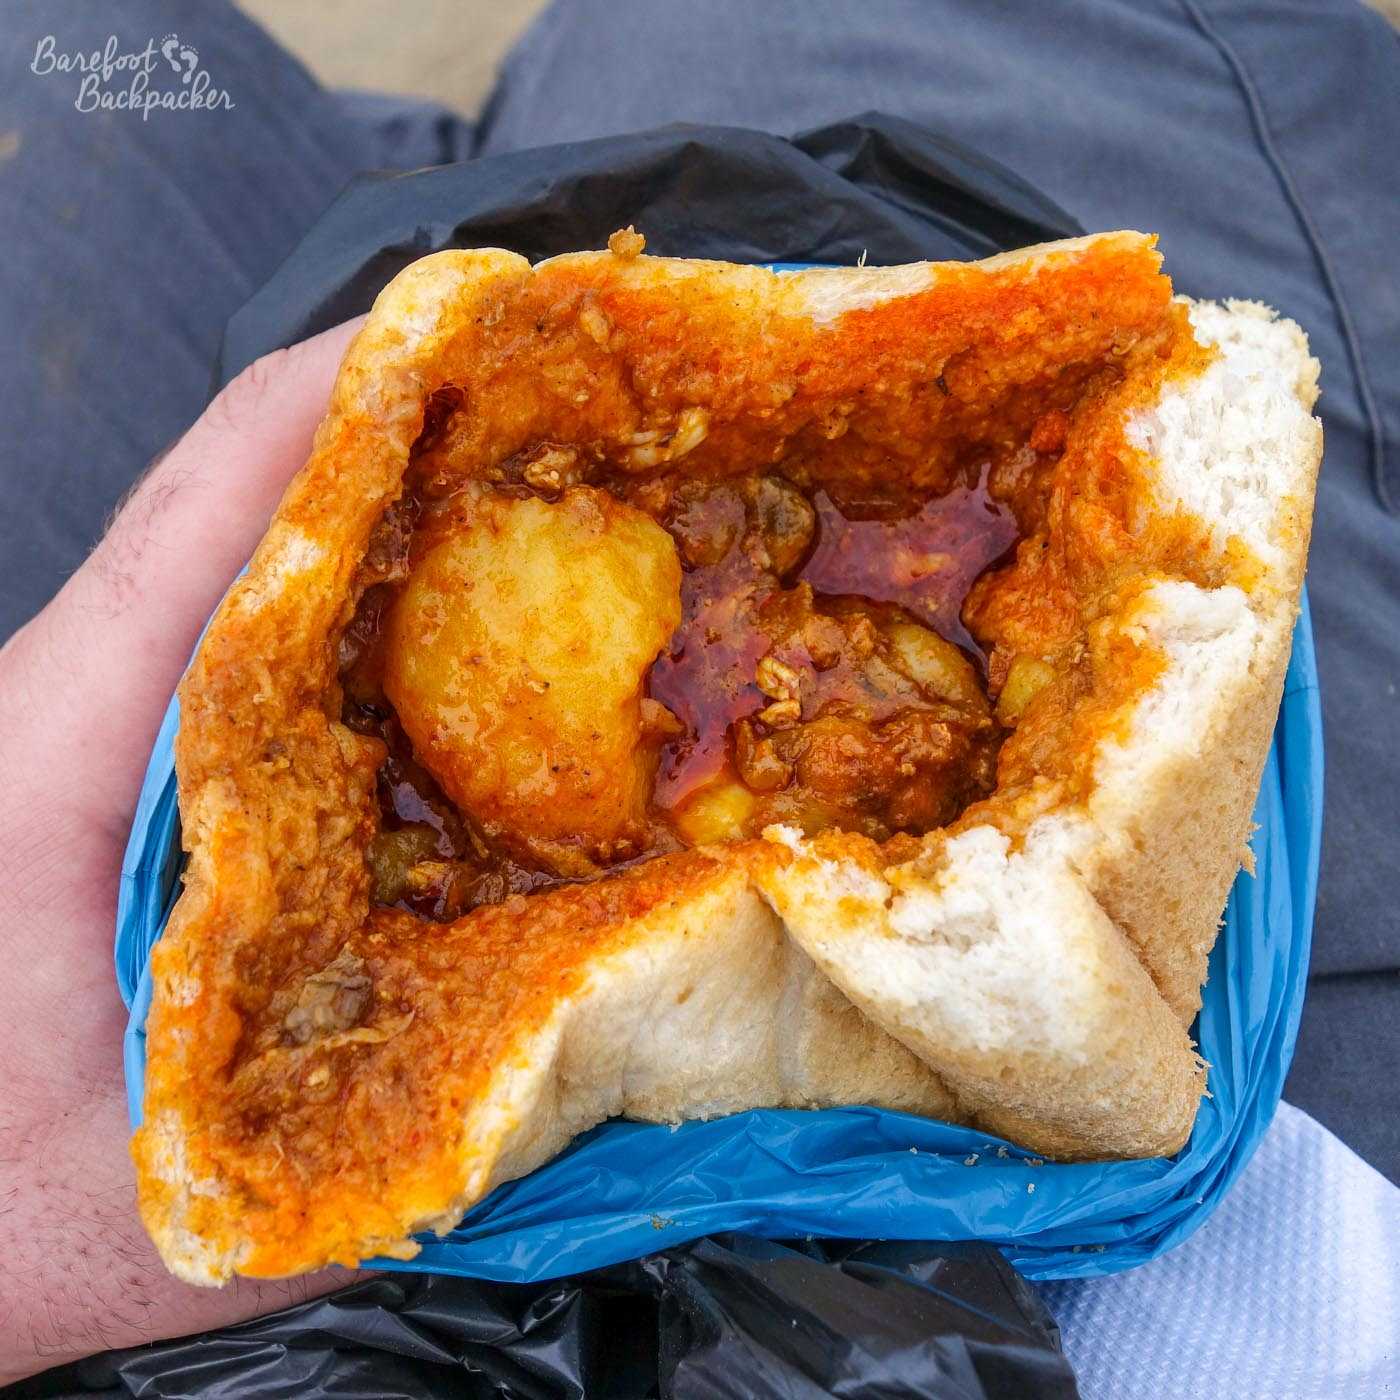 Bunny Chow, opened and ready to eat.